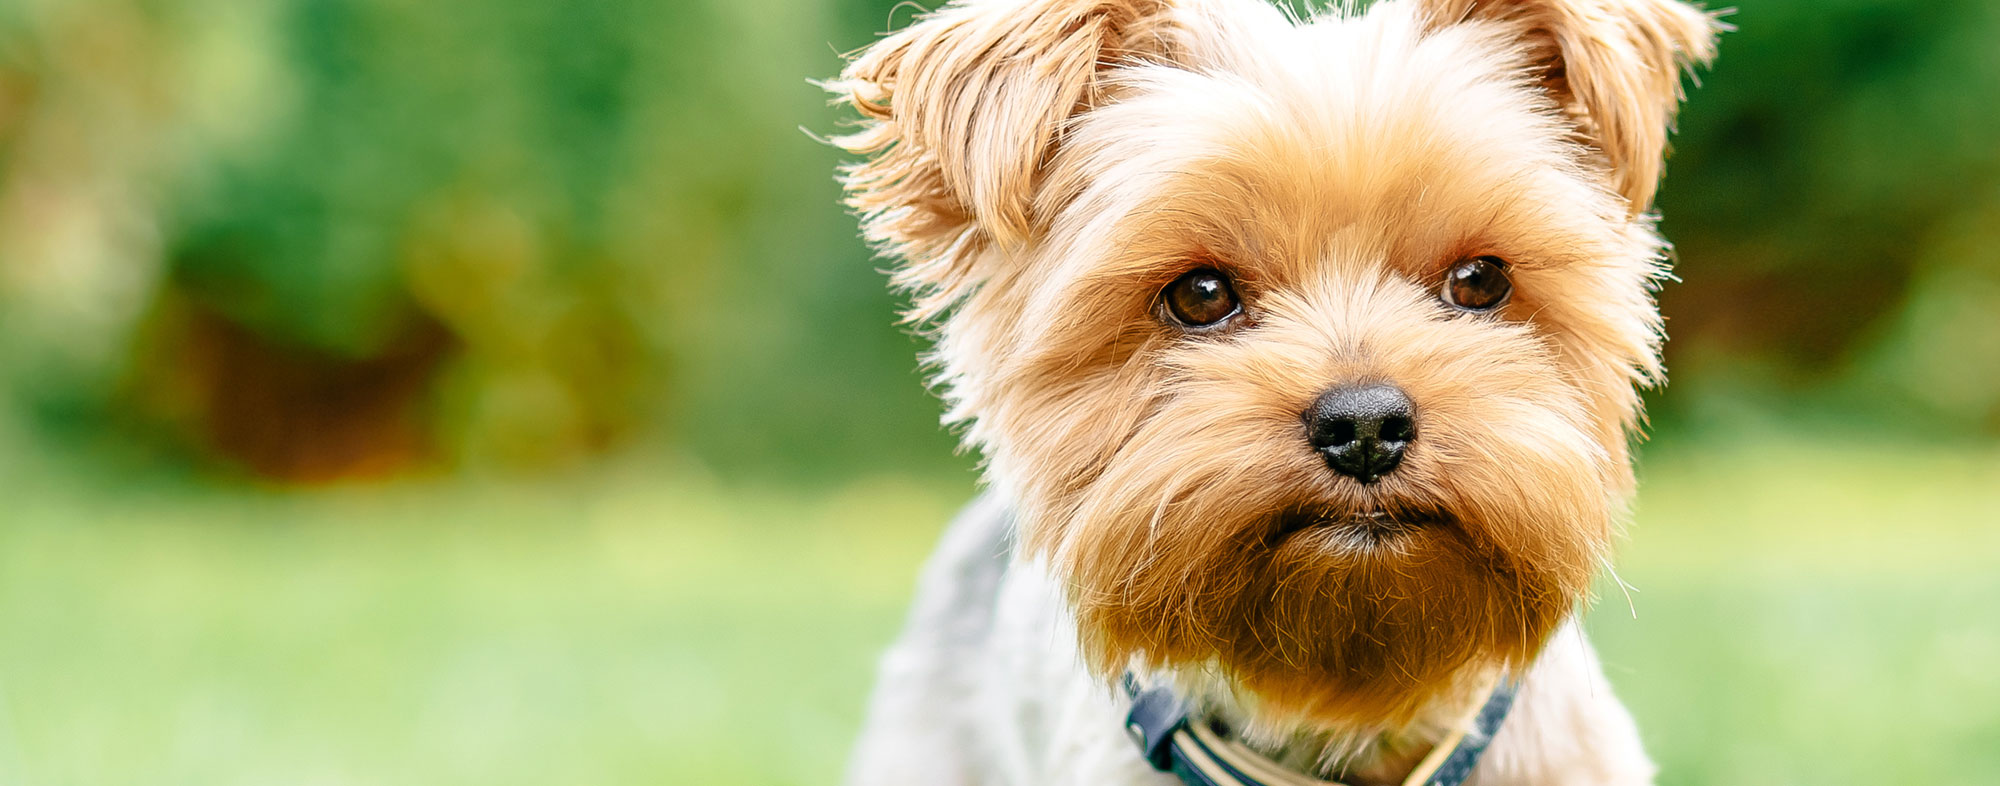 Five things all small dog owners should know | Hartz